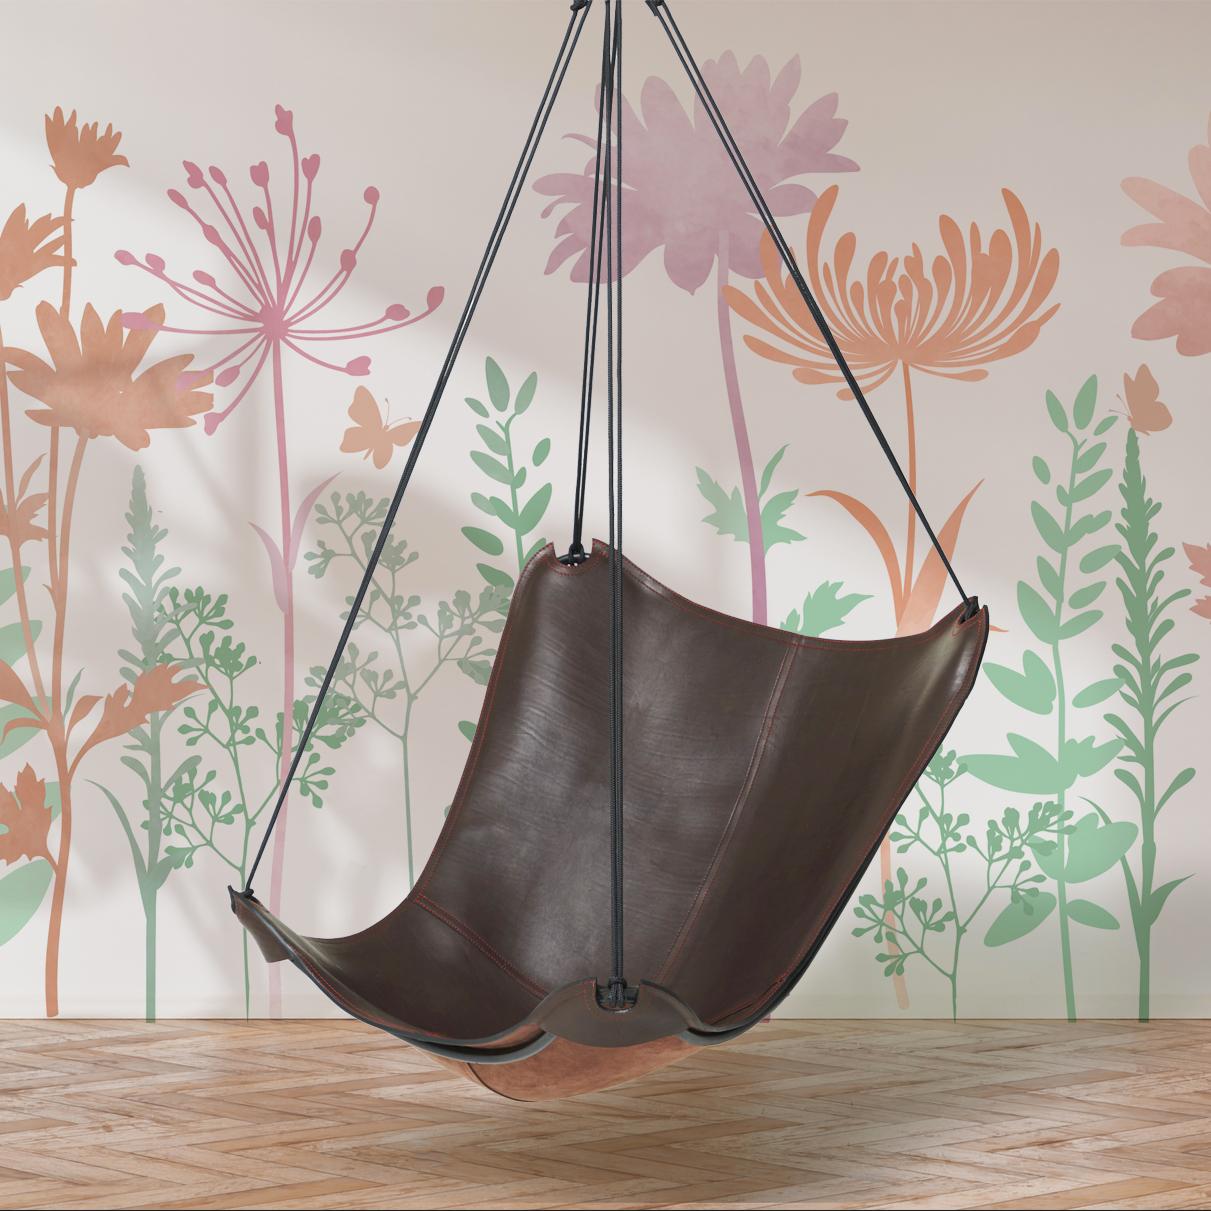 Contemporary Modern Take on the Butterfly Chair - Now Hanging Chair For Sale